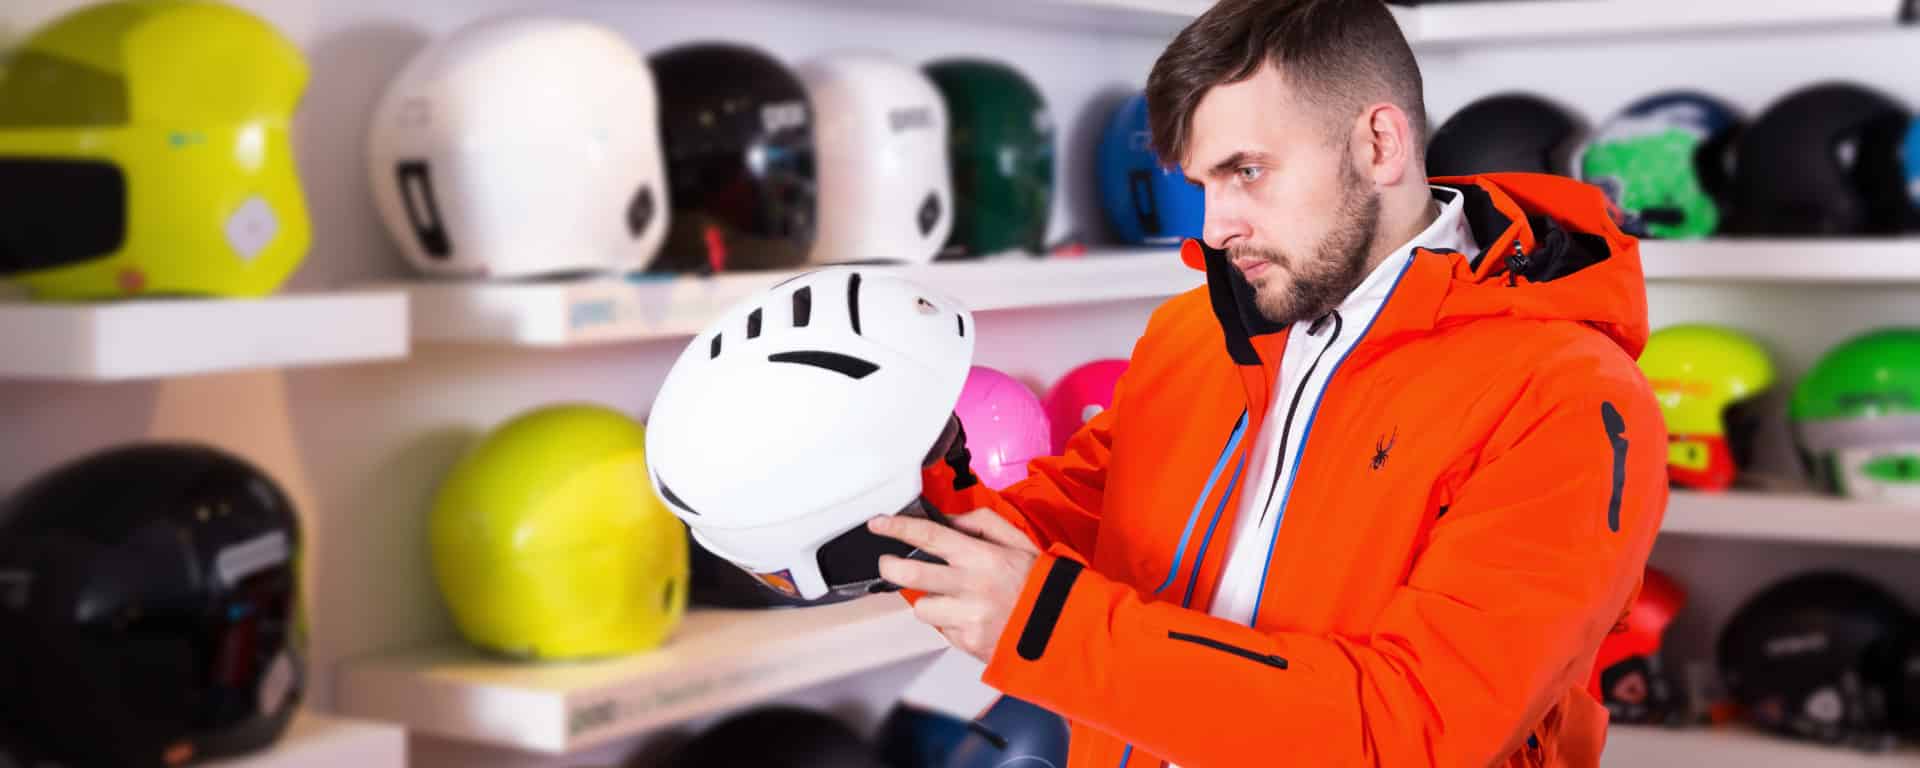 How to Buy a Ski Helmet - Feature Image